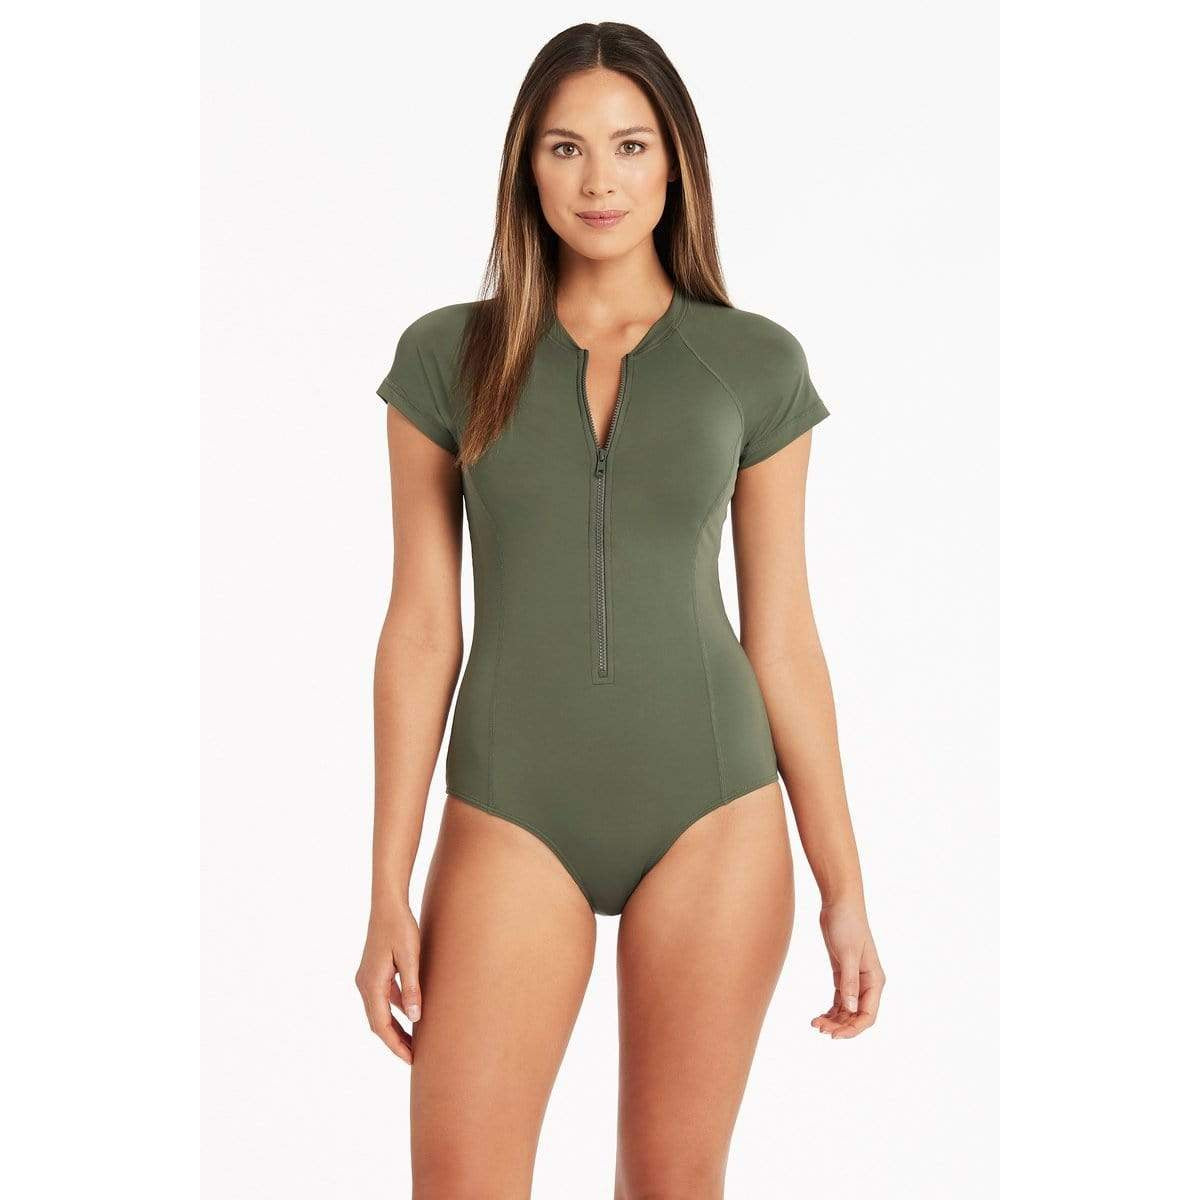 Essential Short Sleeved One Piece-Sealevel-1000 Palms